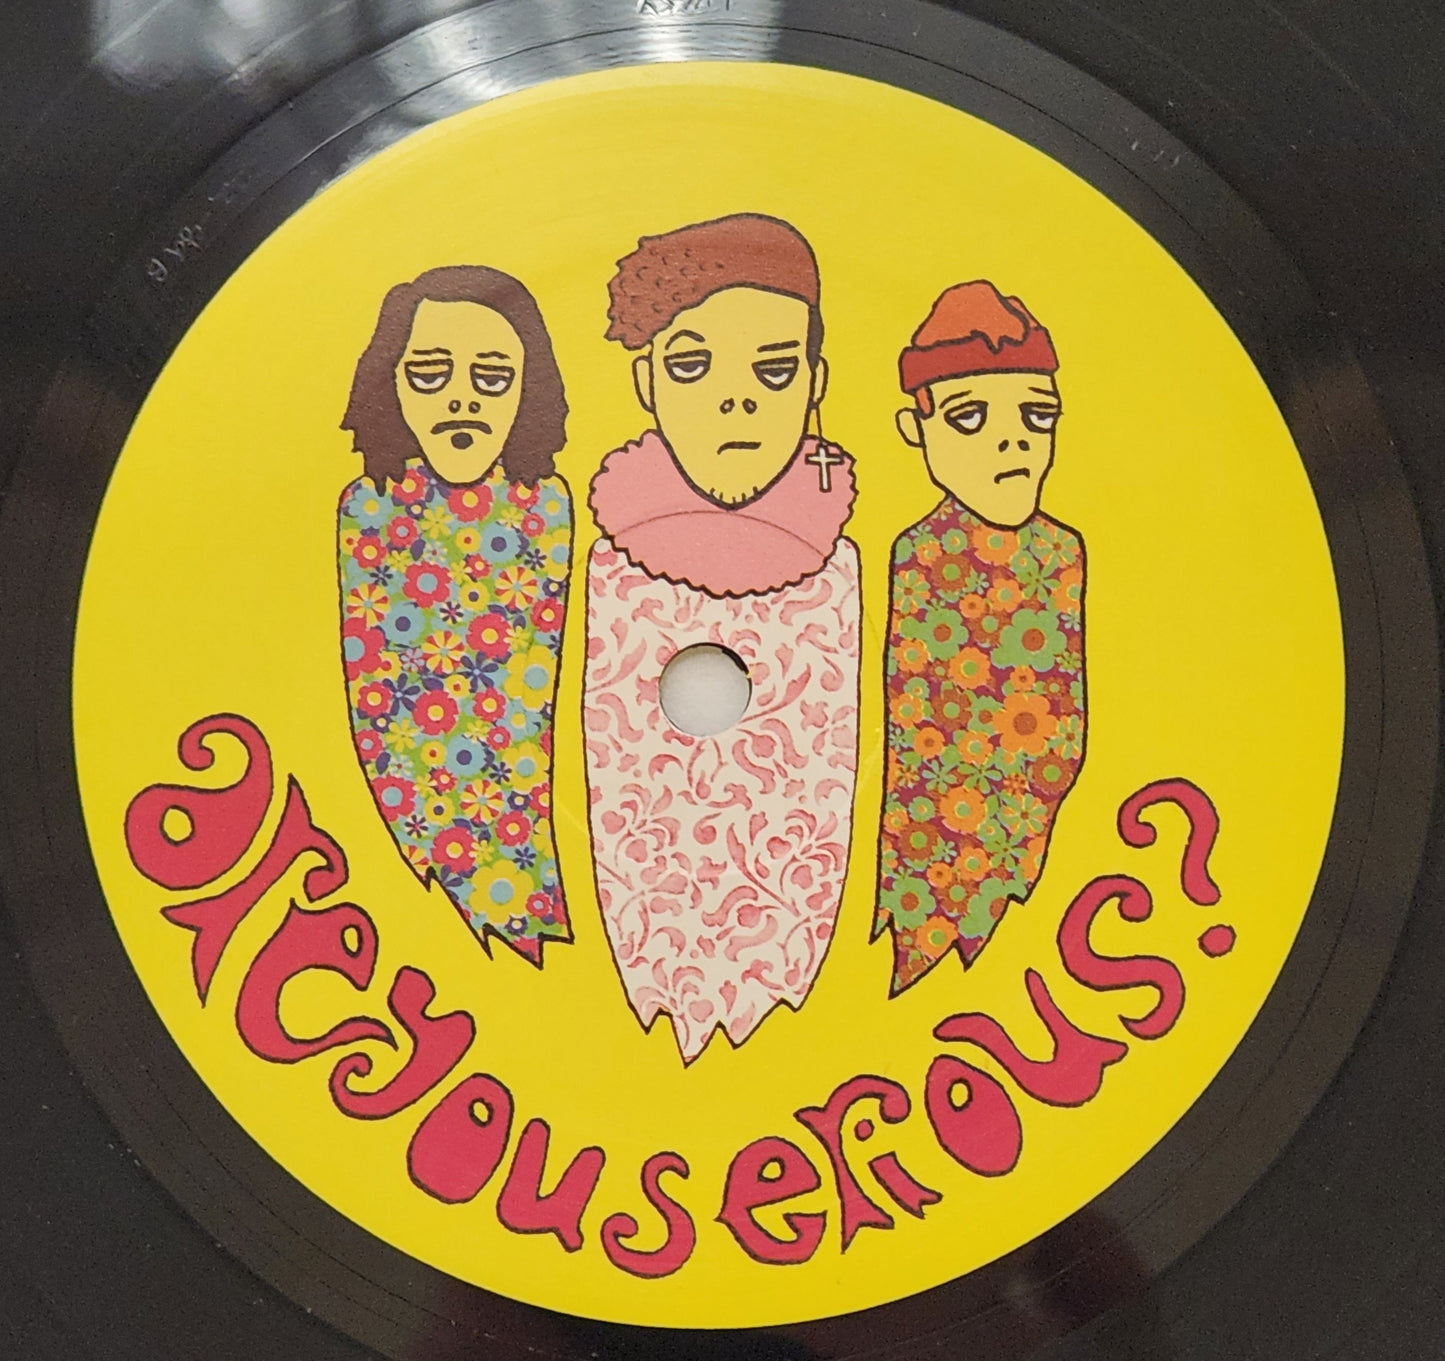 Mean Jeans "Are You Serious" 2009 Punk Record Album